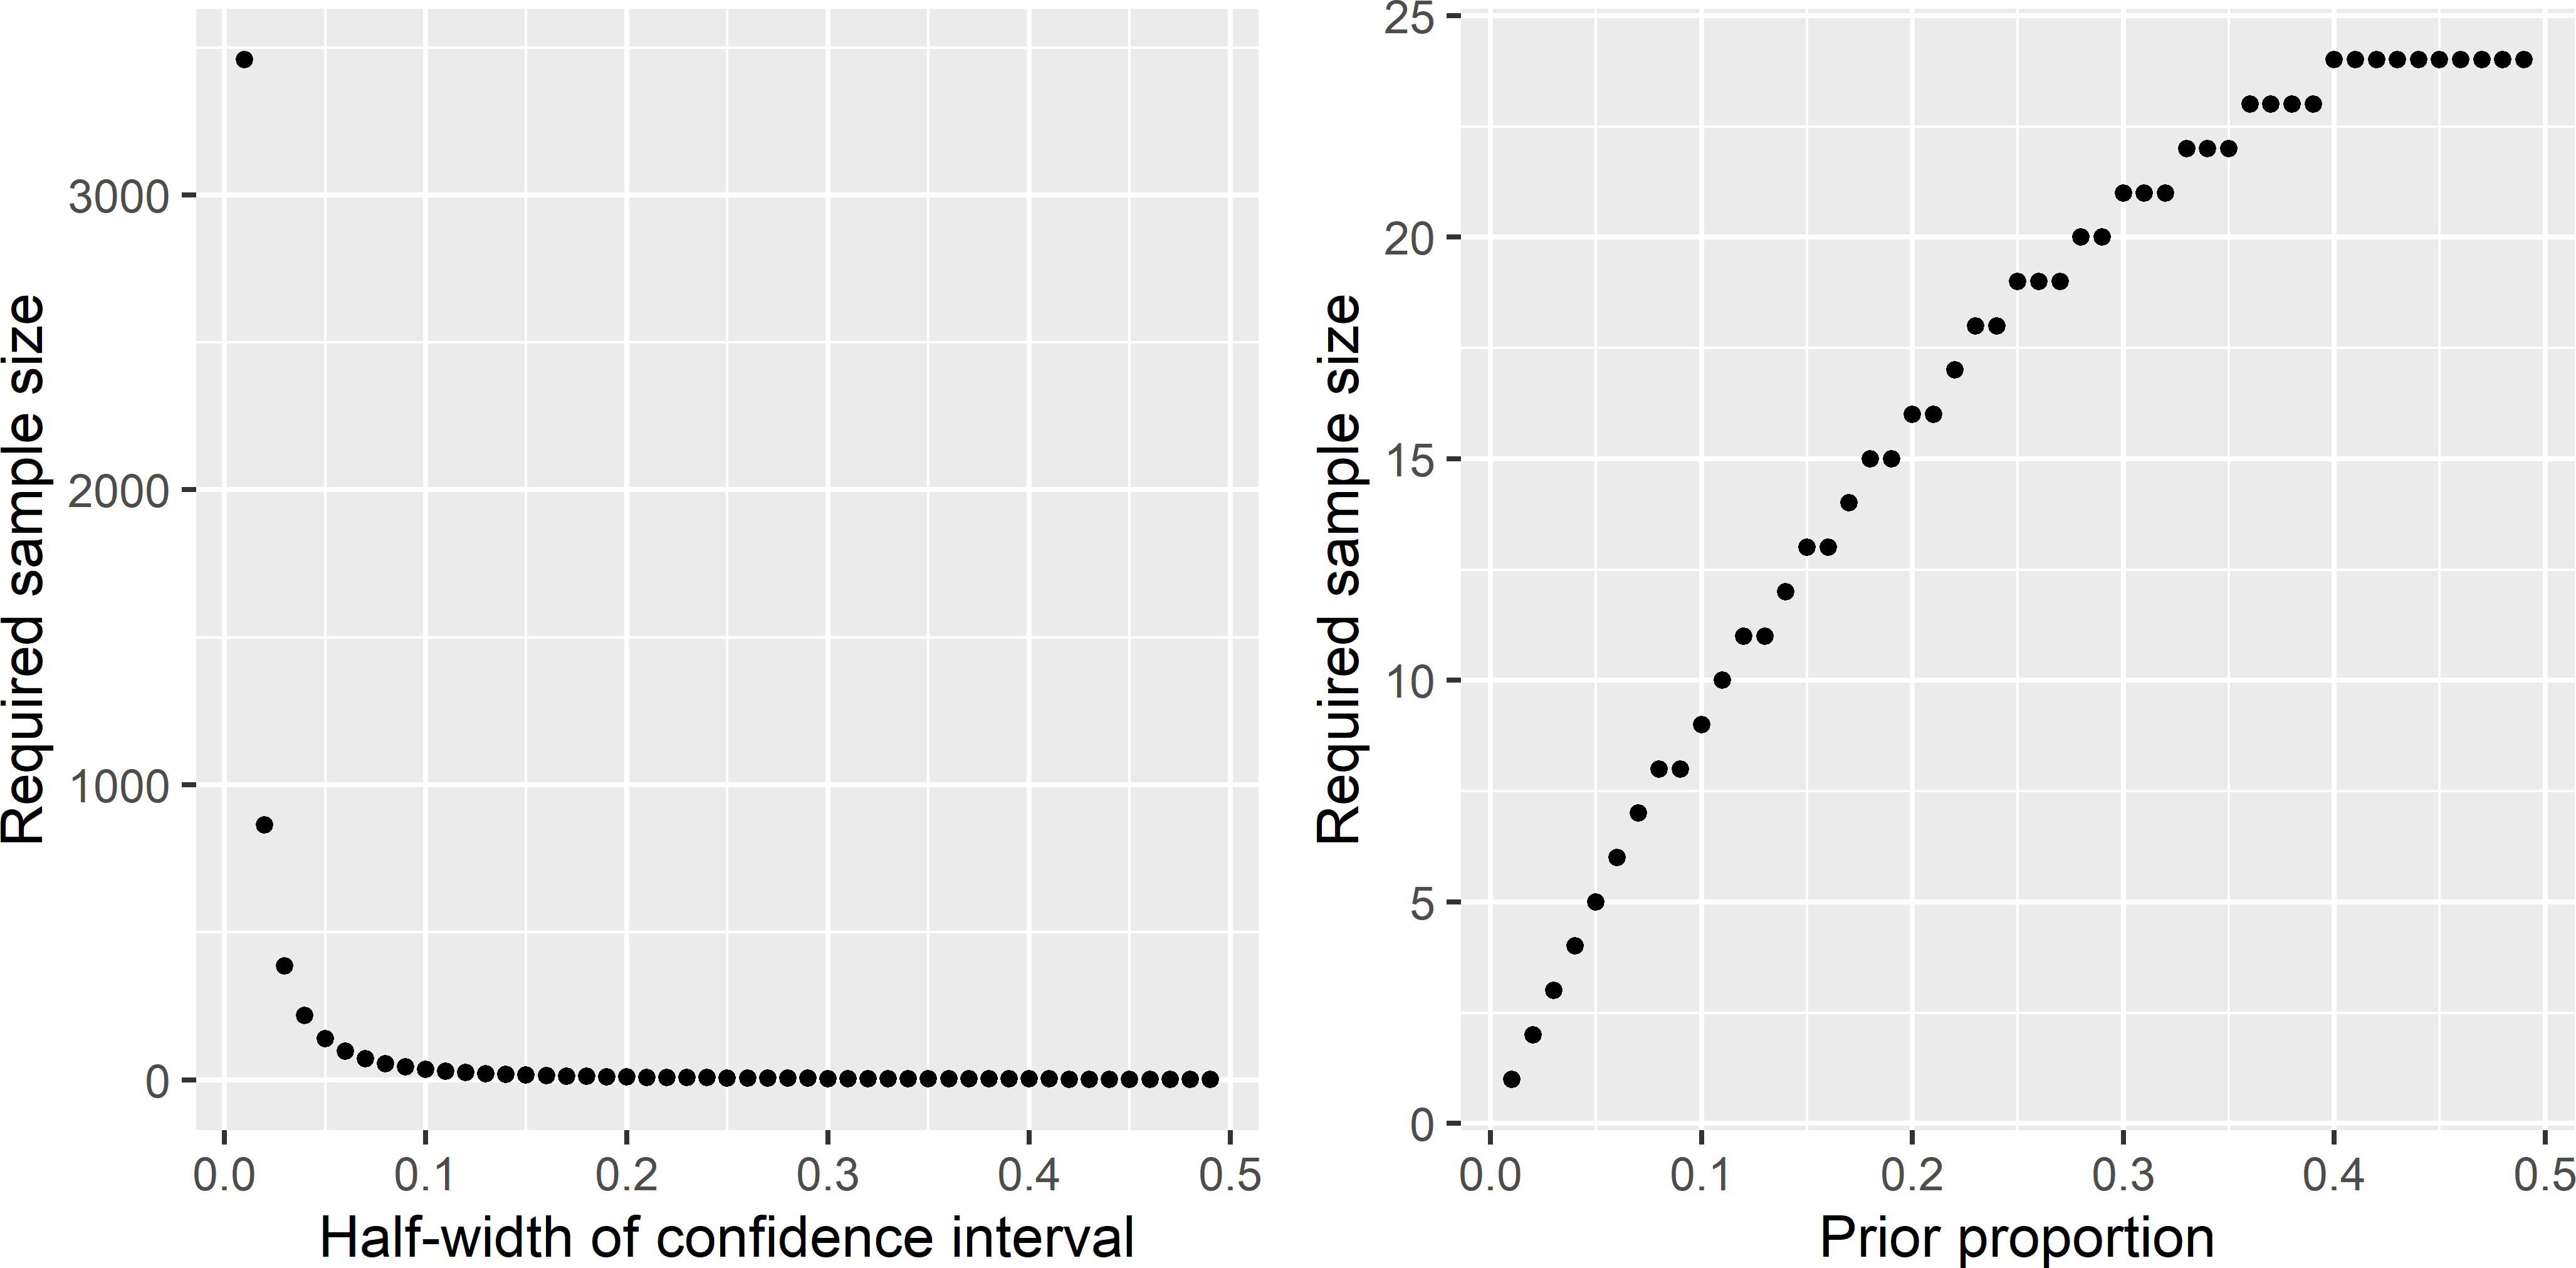 Required sample size as a function of the half-length of a 95% confidence interval of the population proportion, for a prior proportion of 0.1 (left subfigure), and as a function of the prior proportion for a half-length of a 95% confidence interval of 0.2 (right subfigure).